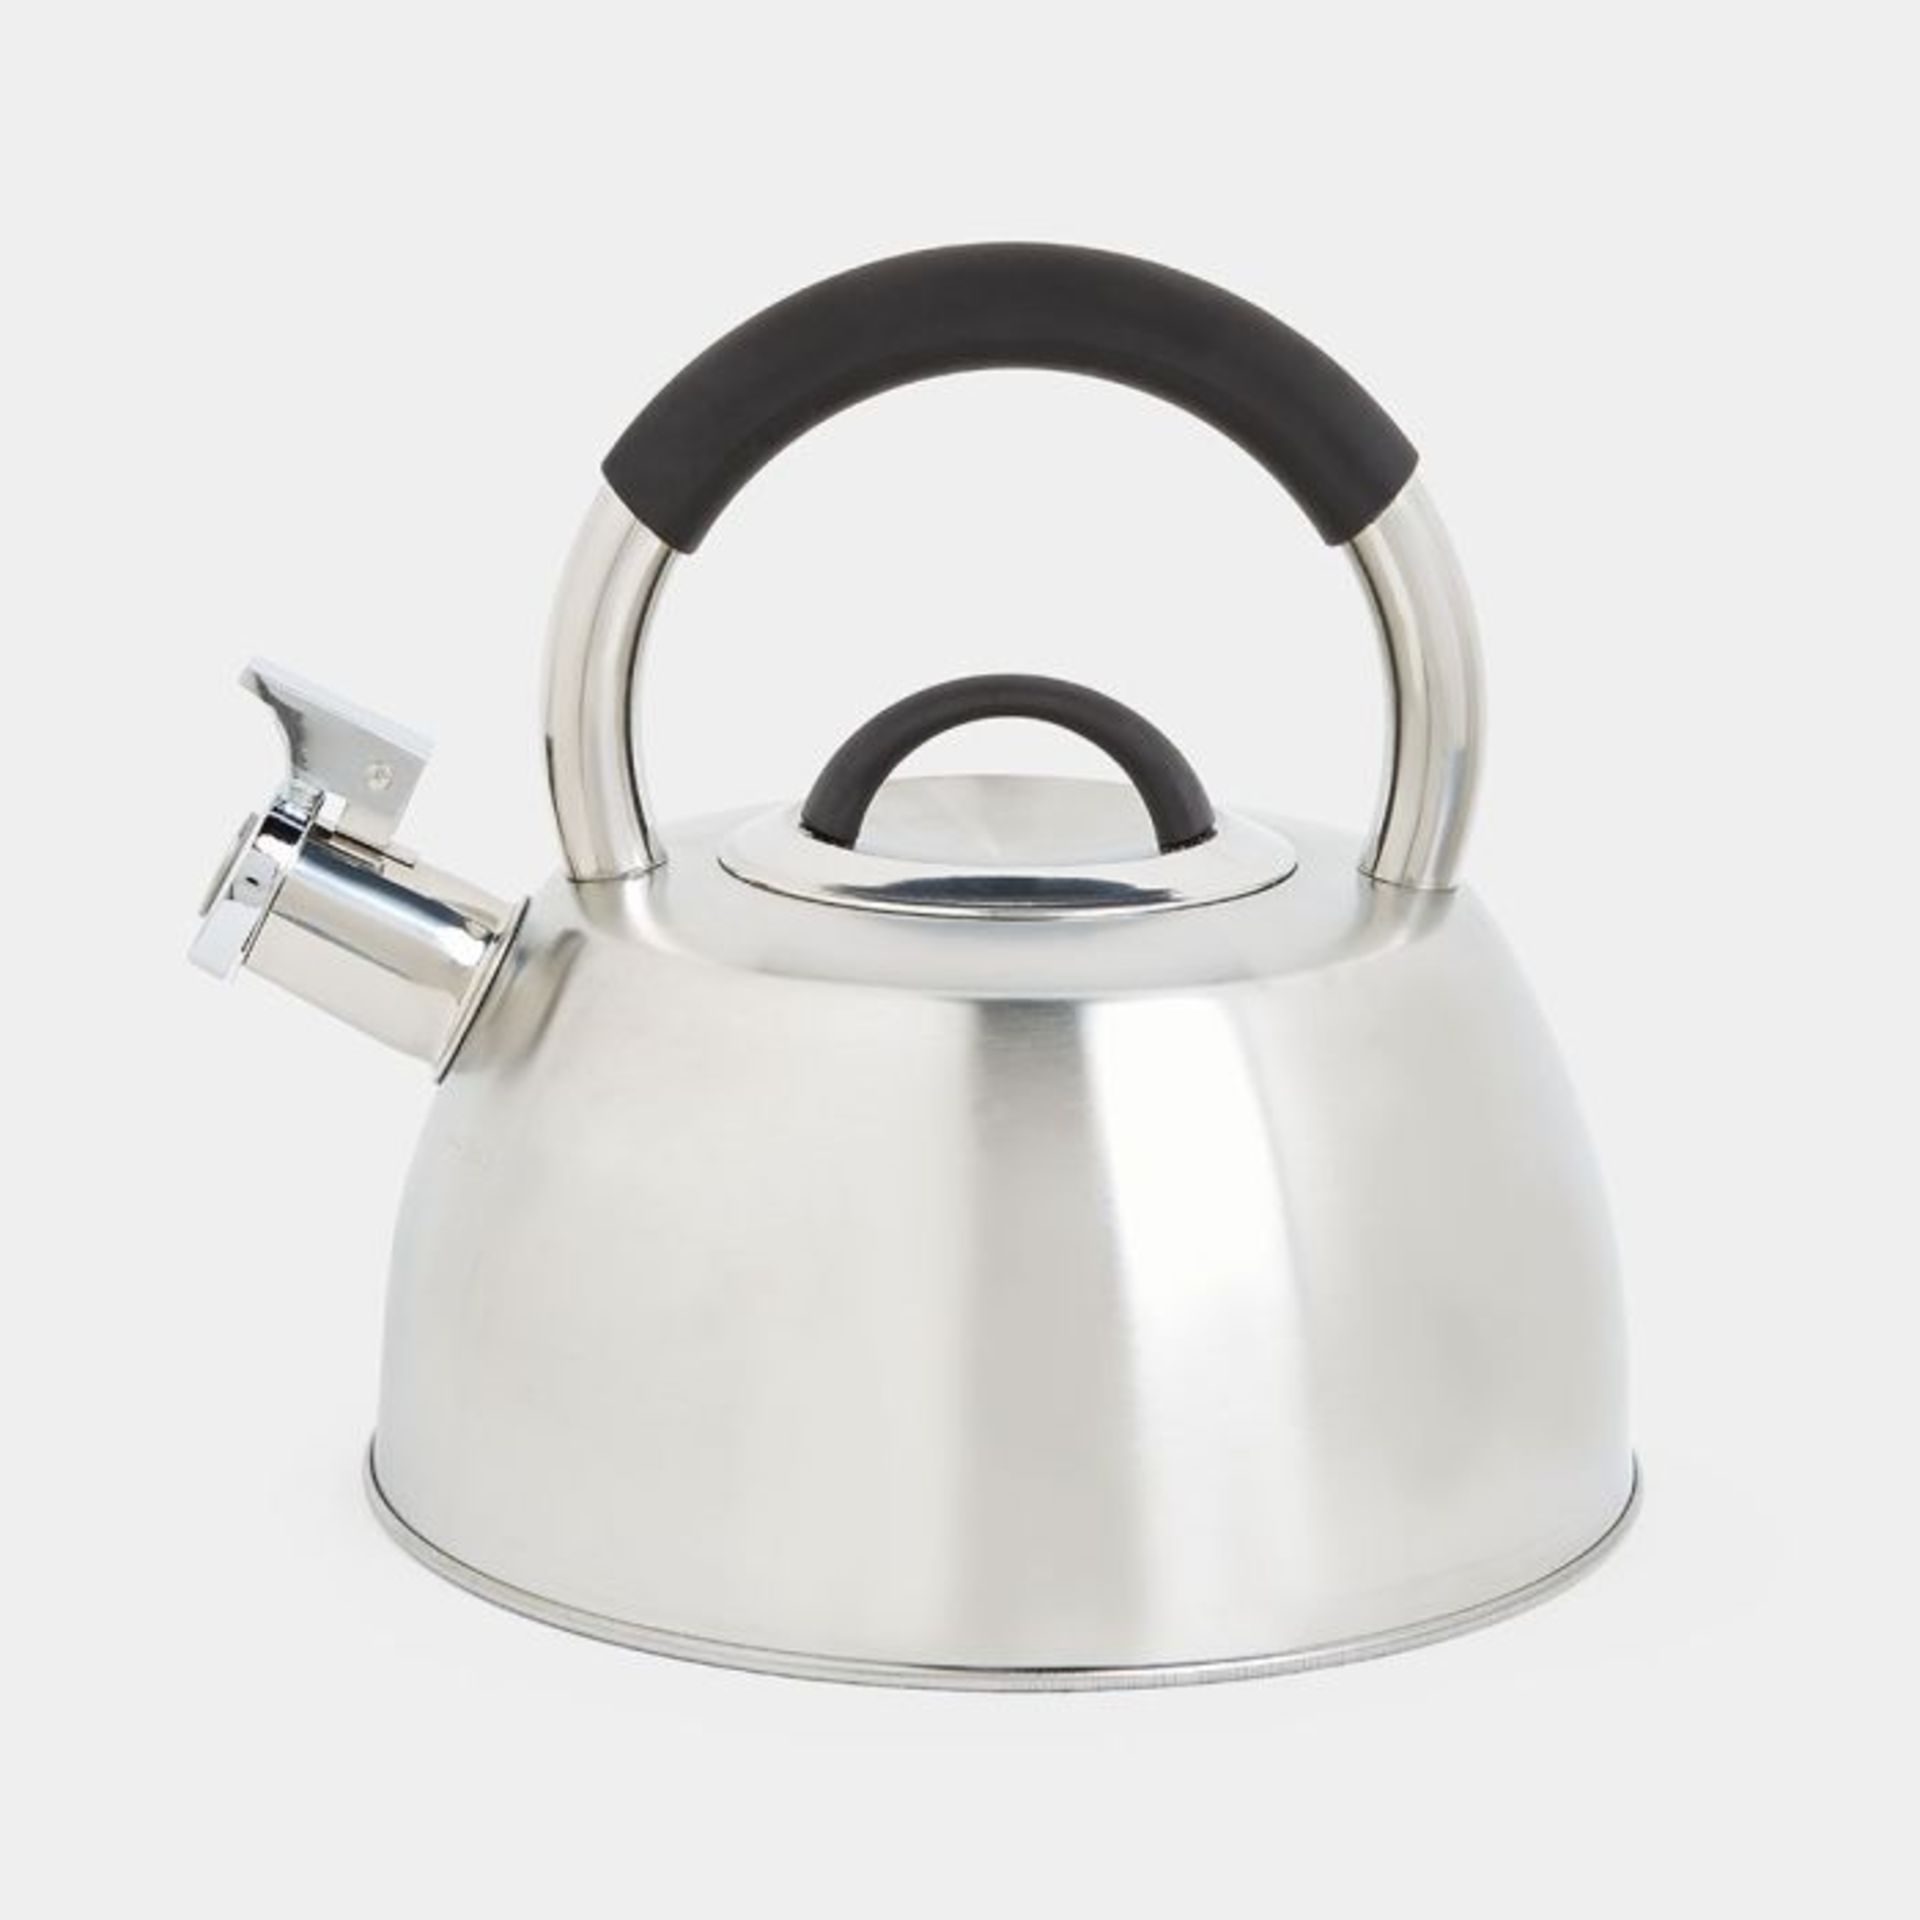 2.5L Silver Whistling Stove Top Kettle. RRP £20 - Grade U